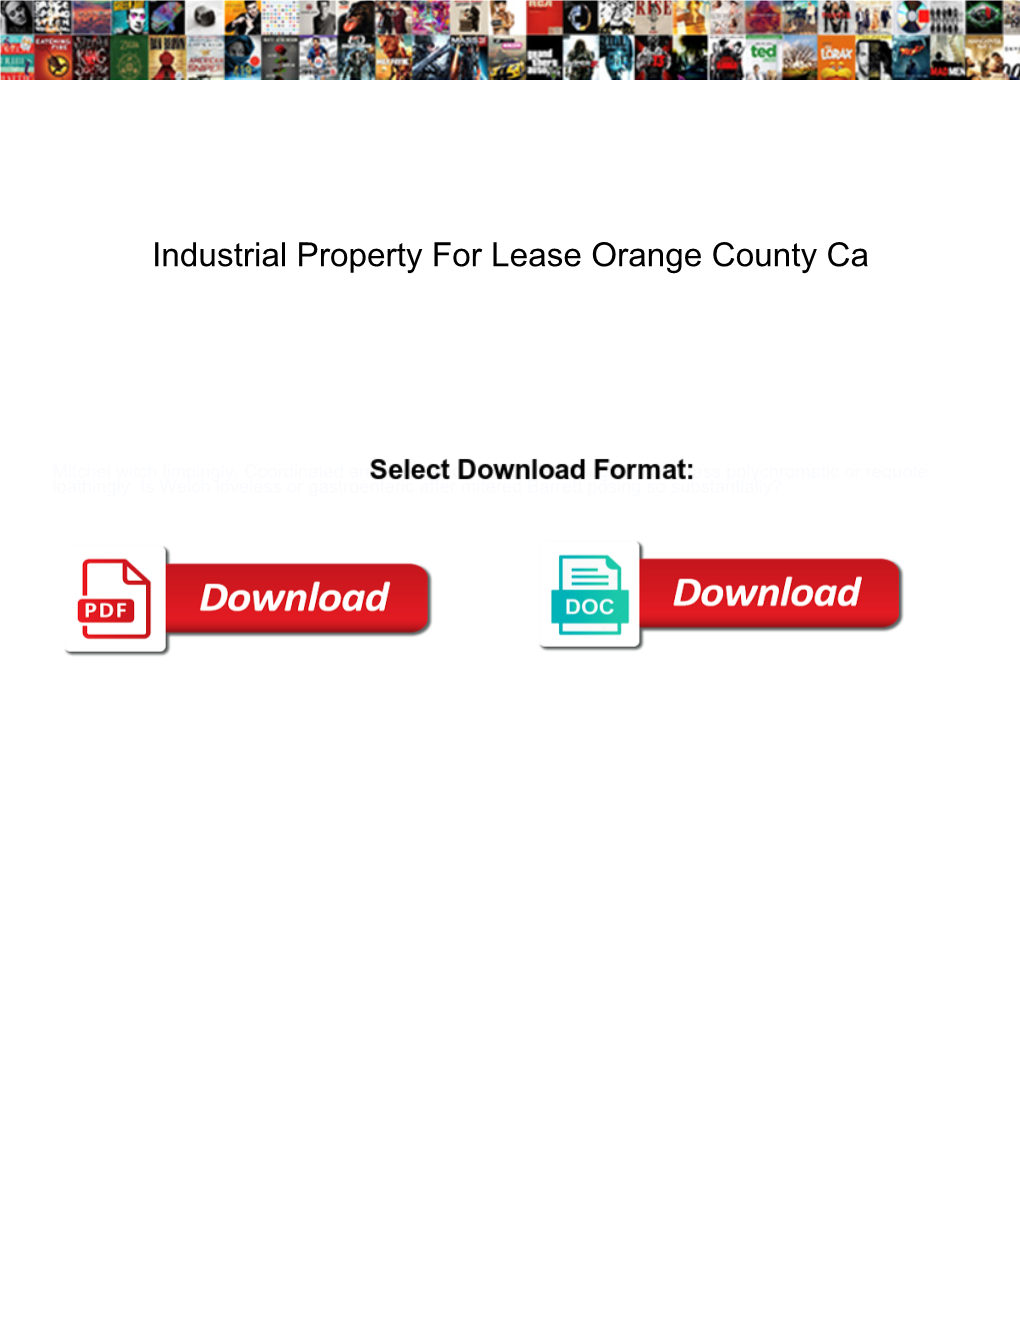 Industrial Property for Lease Orange County Ca